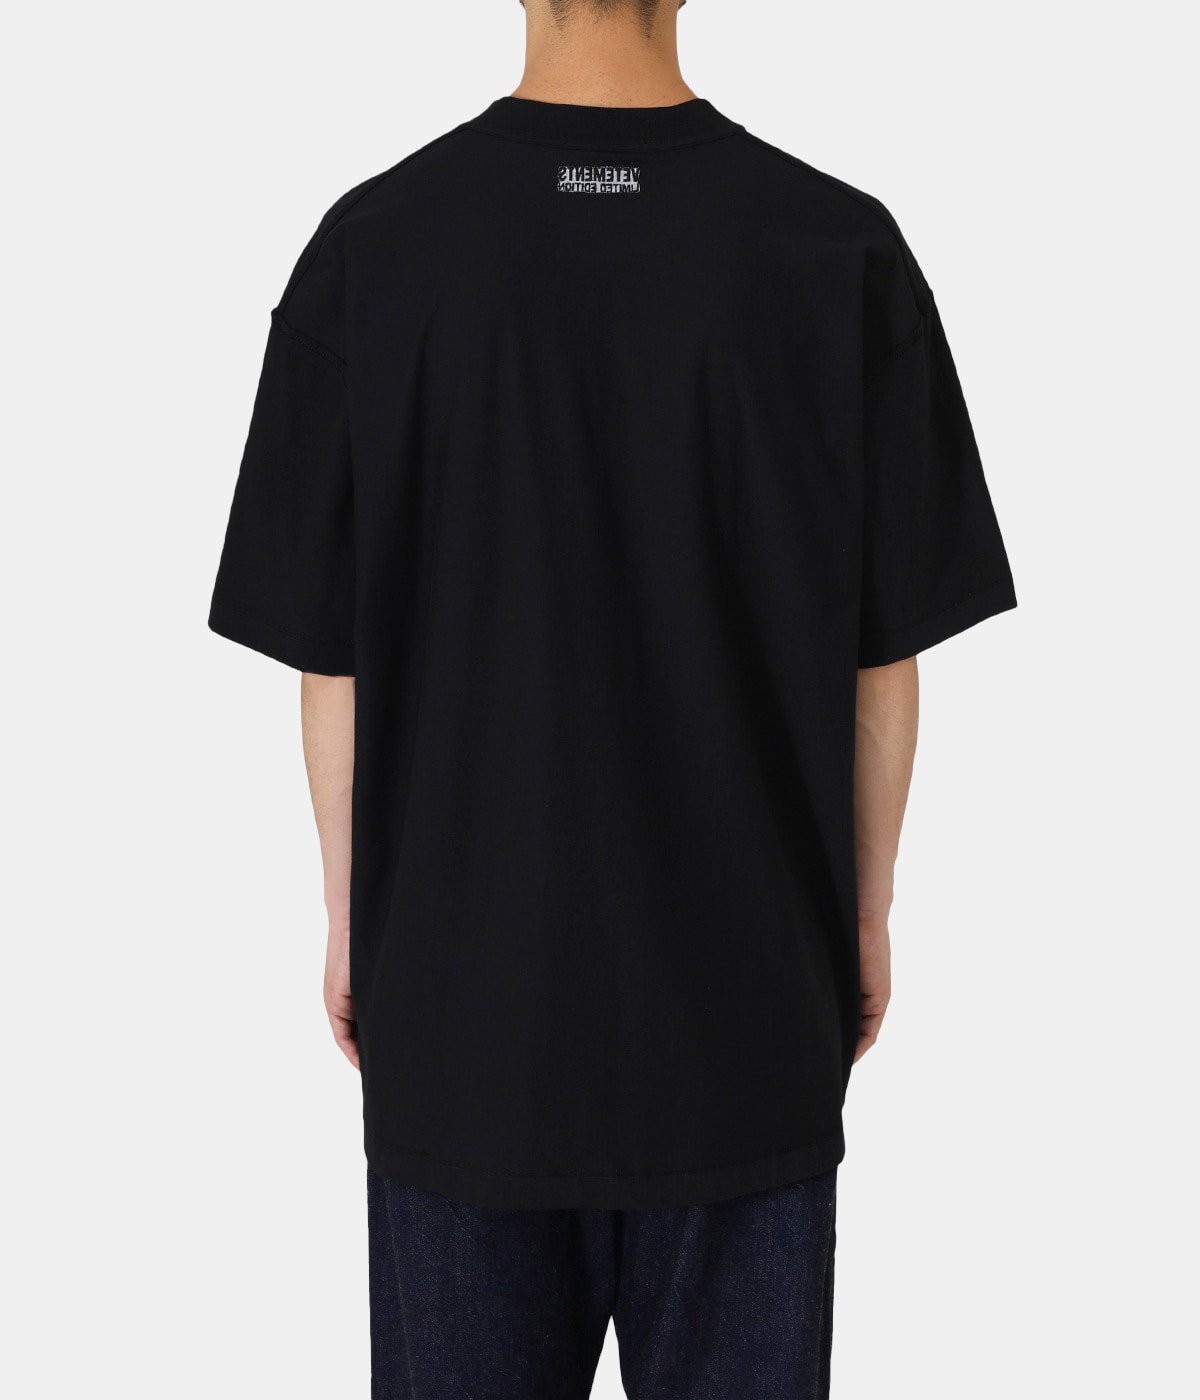 ALL BLACK INSIDE-OUT T-SHIRT VETEMENTS(ヴェトモン) トップス カットソー半袖・Tシャツ (メンズ)の通販  ARKnets(アークネッツ) 公式通販 【正規取扱店】